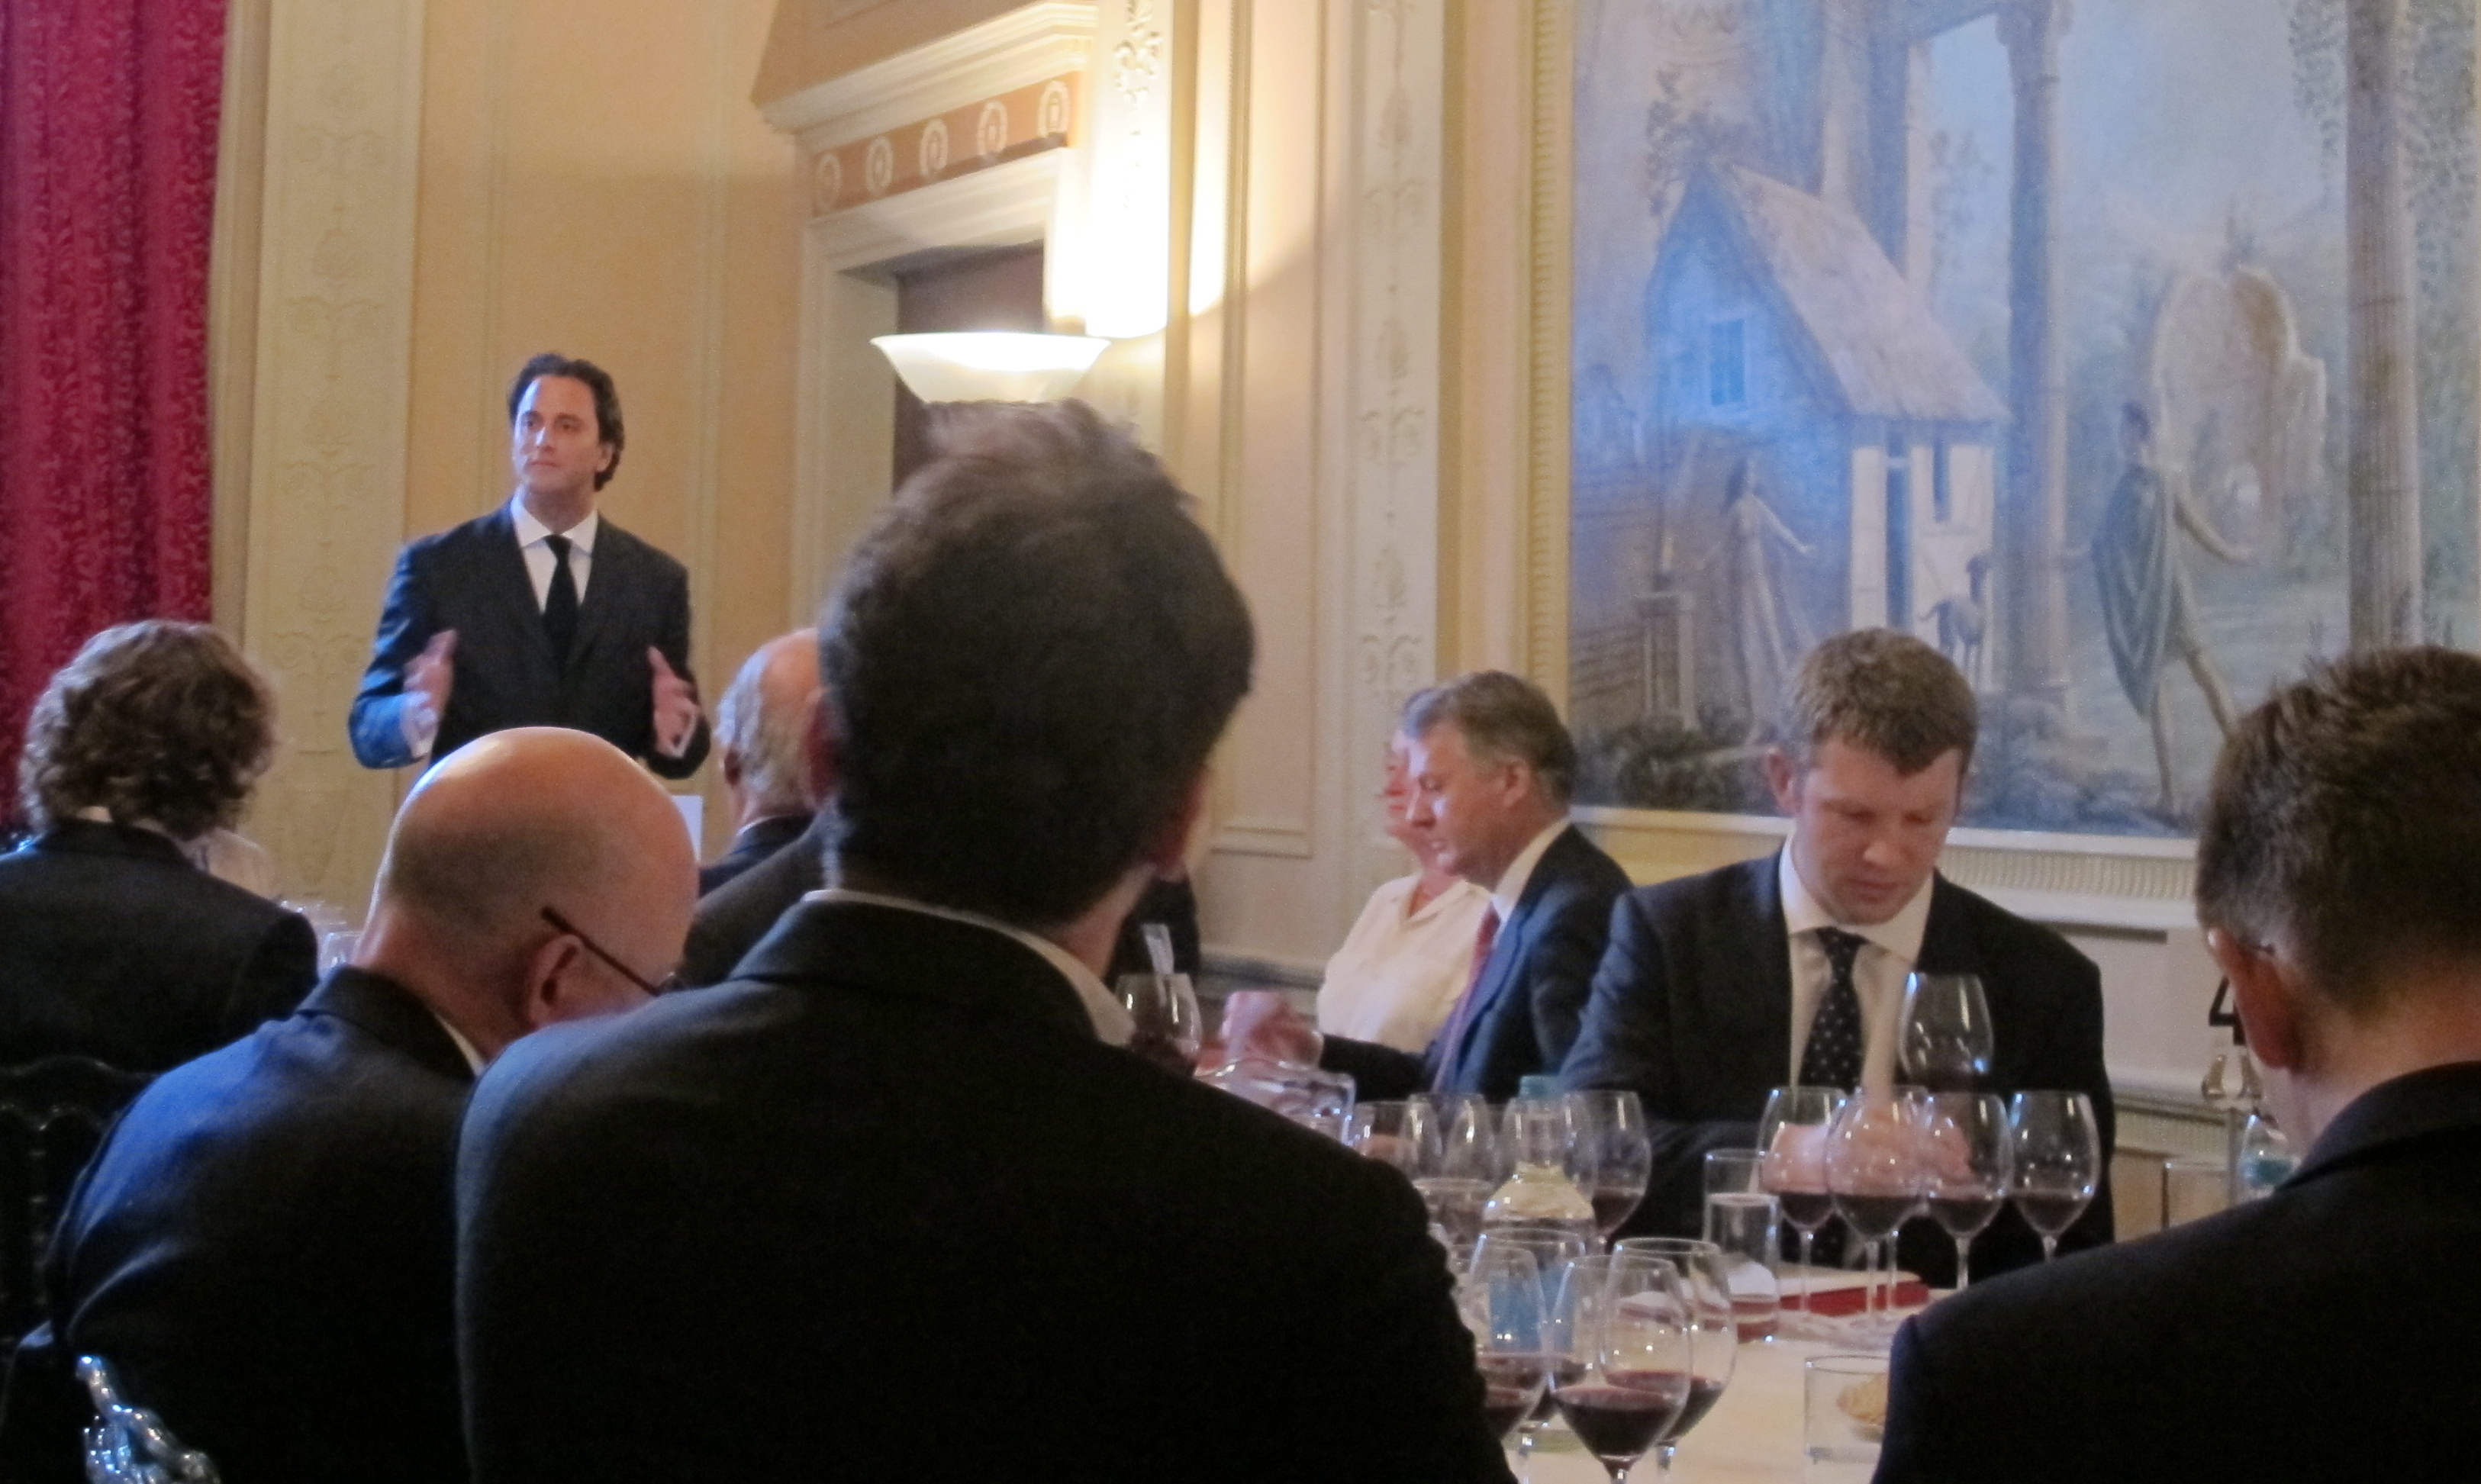 Edouard Moueix speaking during a wine dinner in London